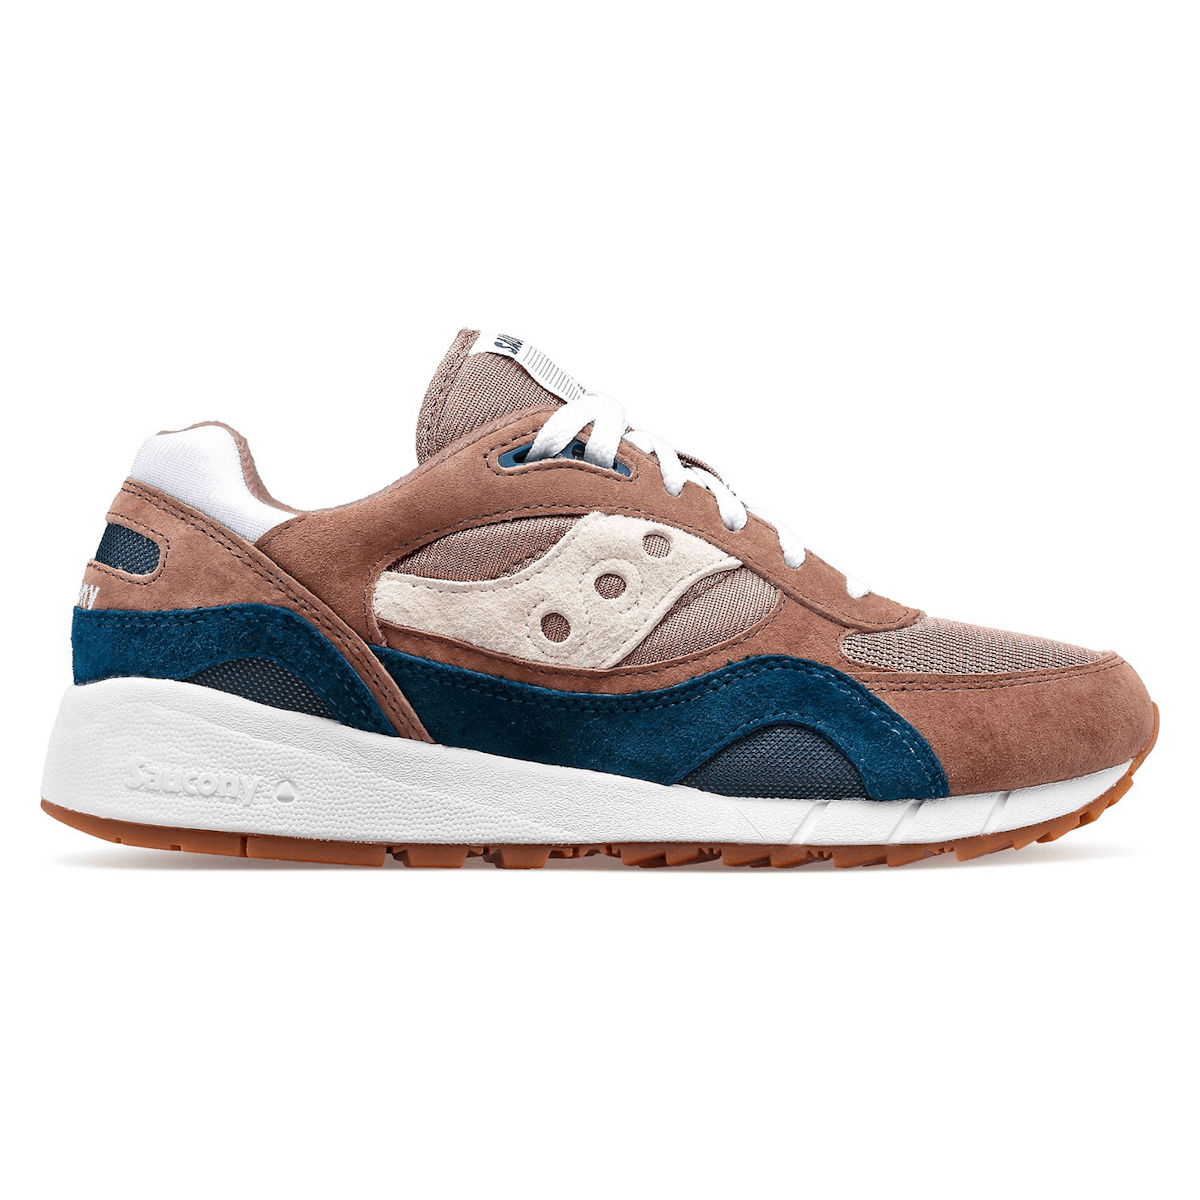 Saucony Shadow 6000 Brown Navy